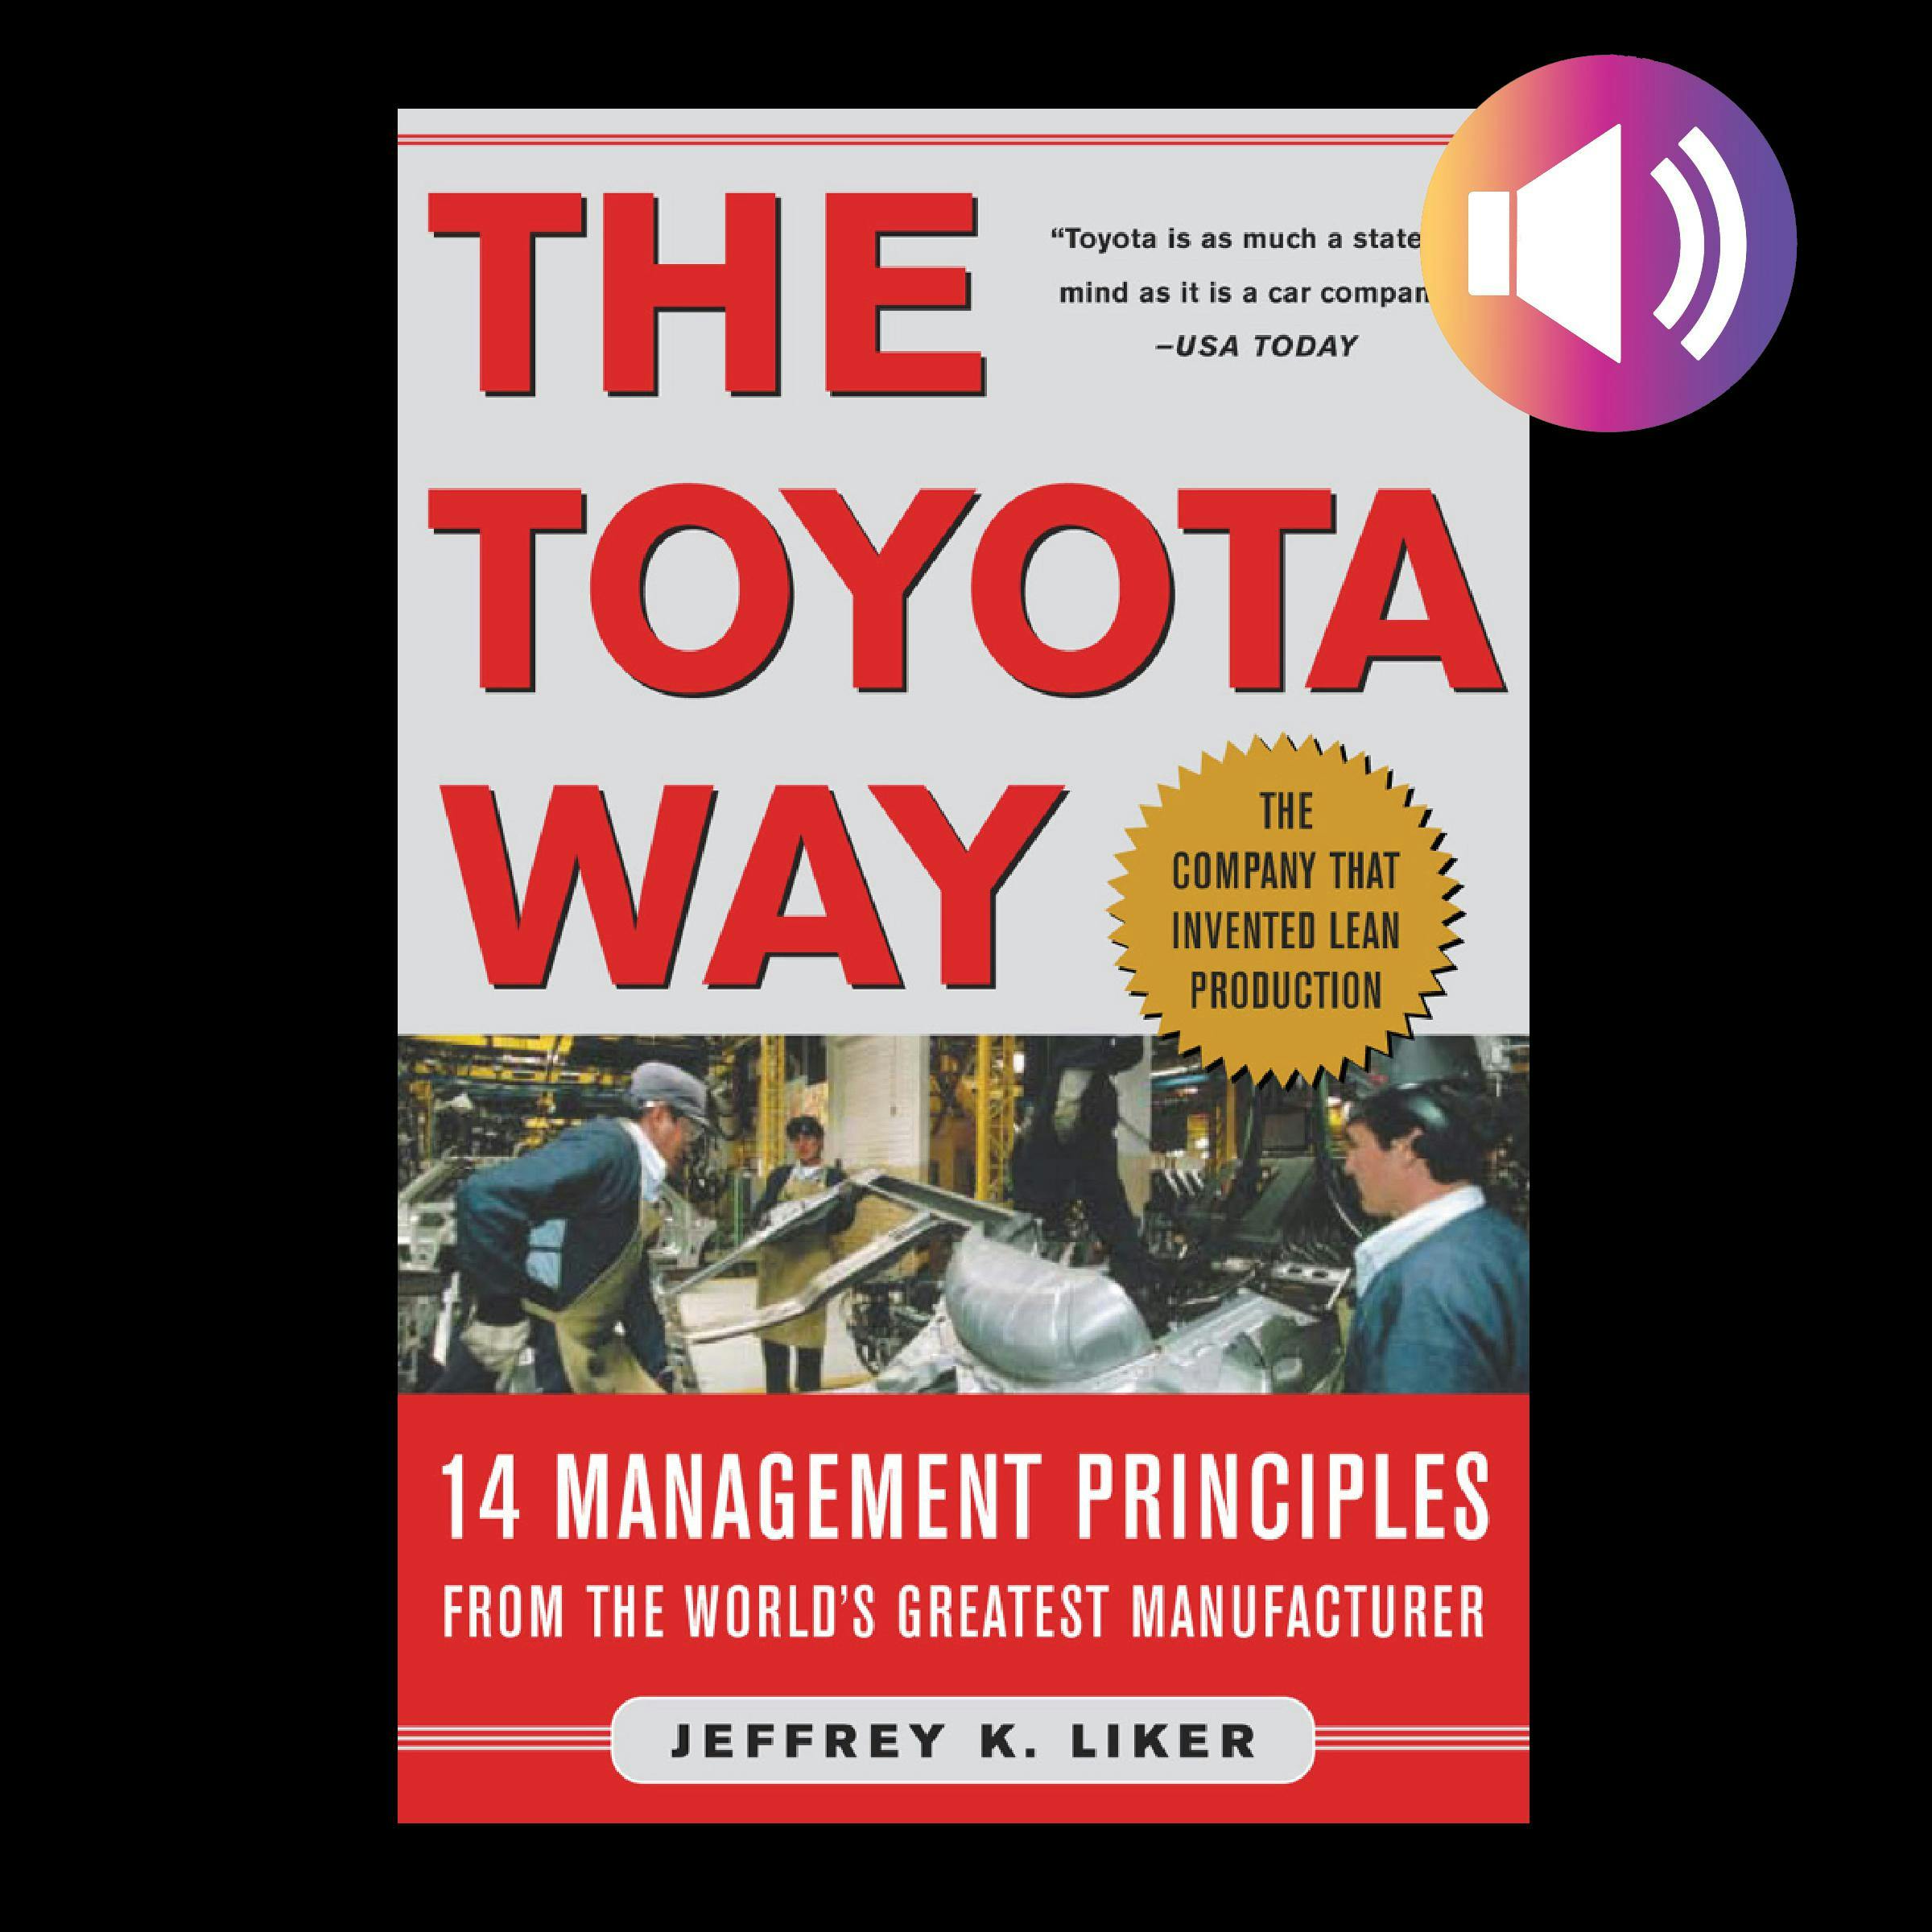 The Toyota Way: 14 Management Principles from the World's Greatest Manufacturer - Jeffrey K. Liker